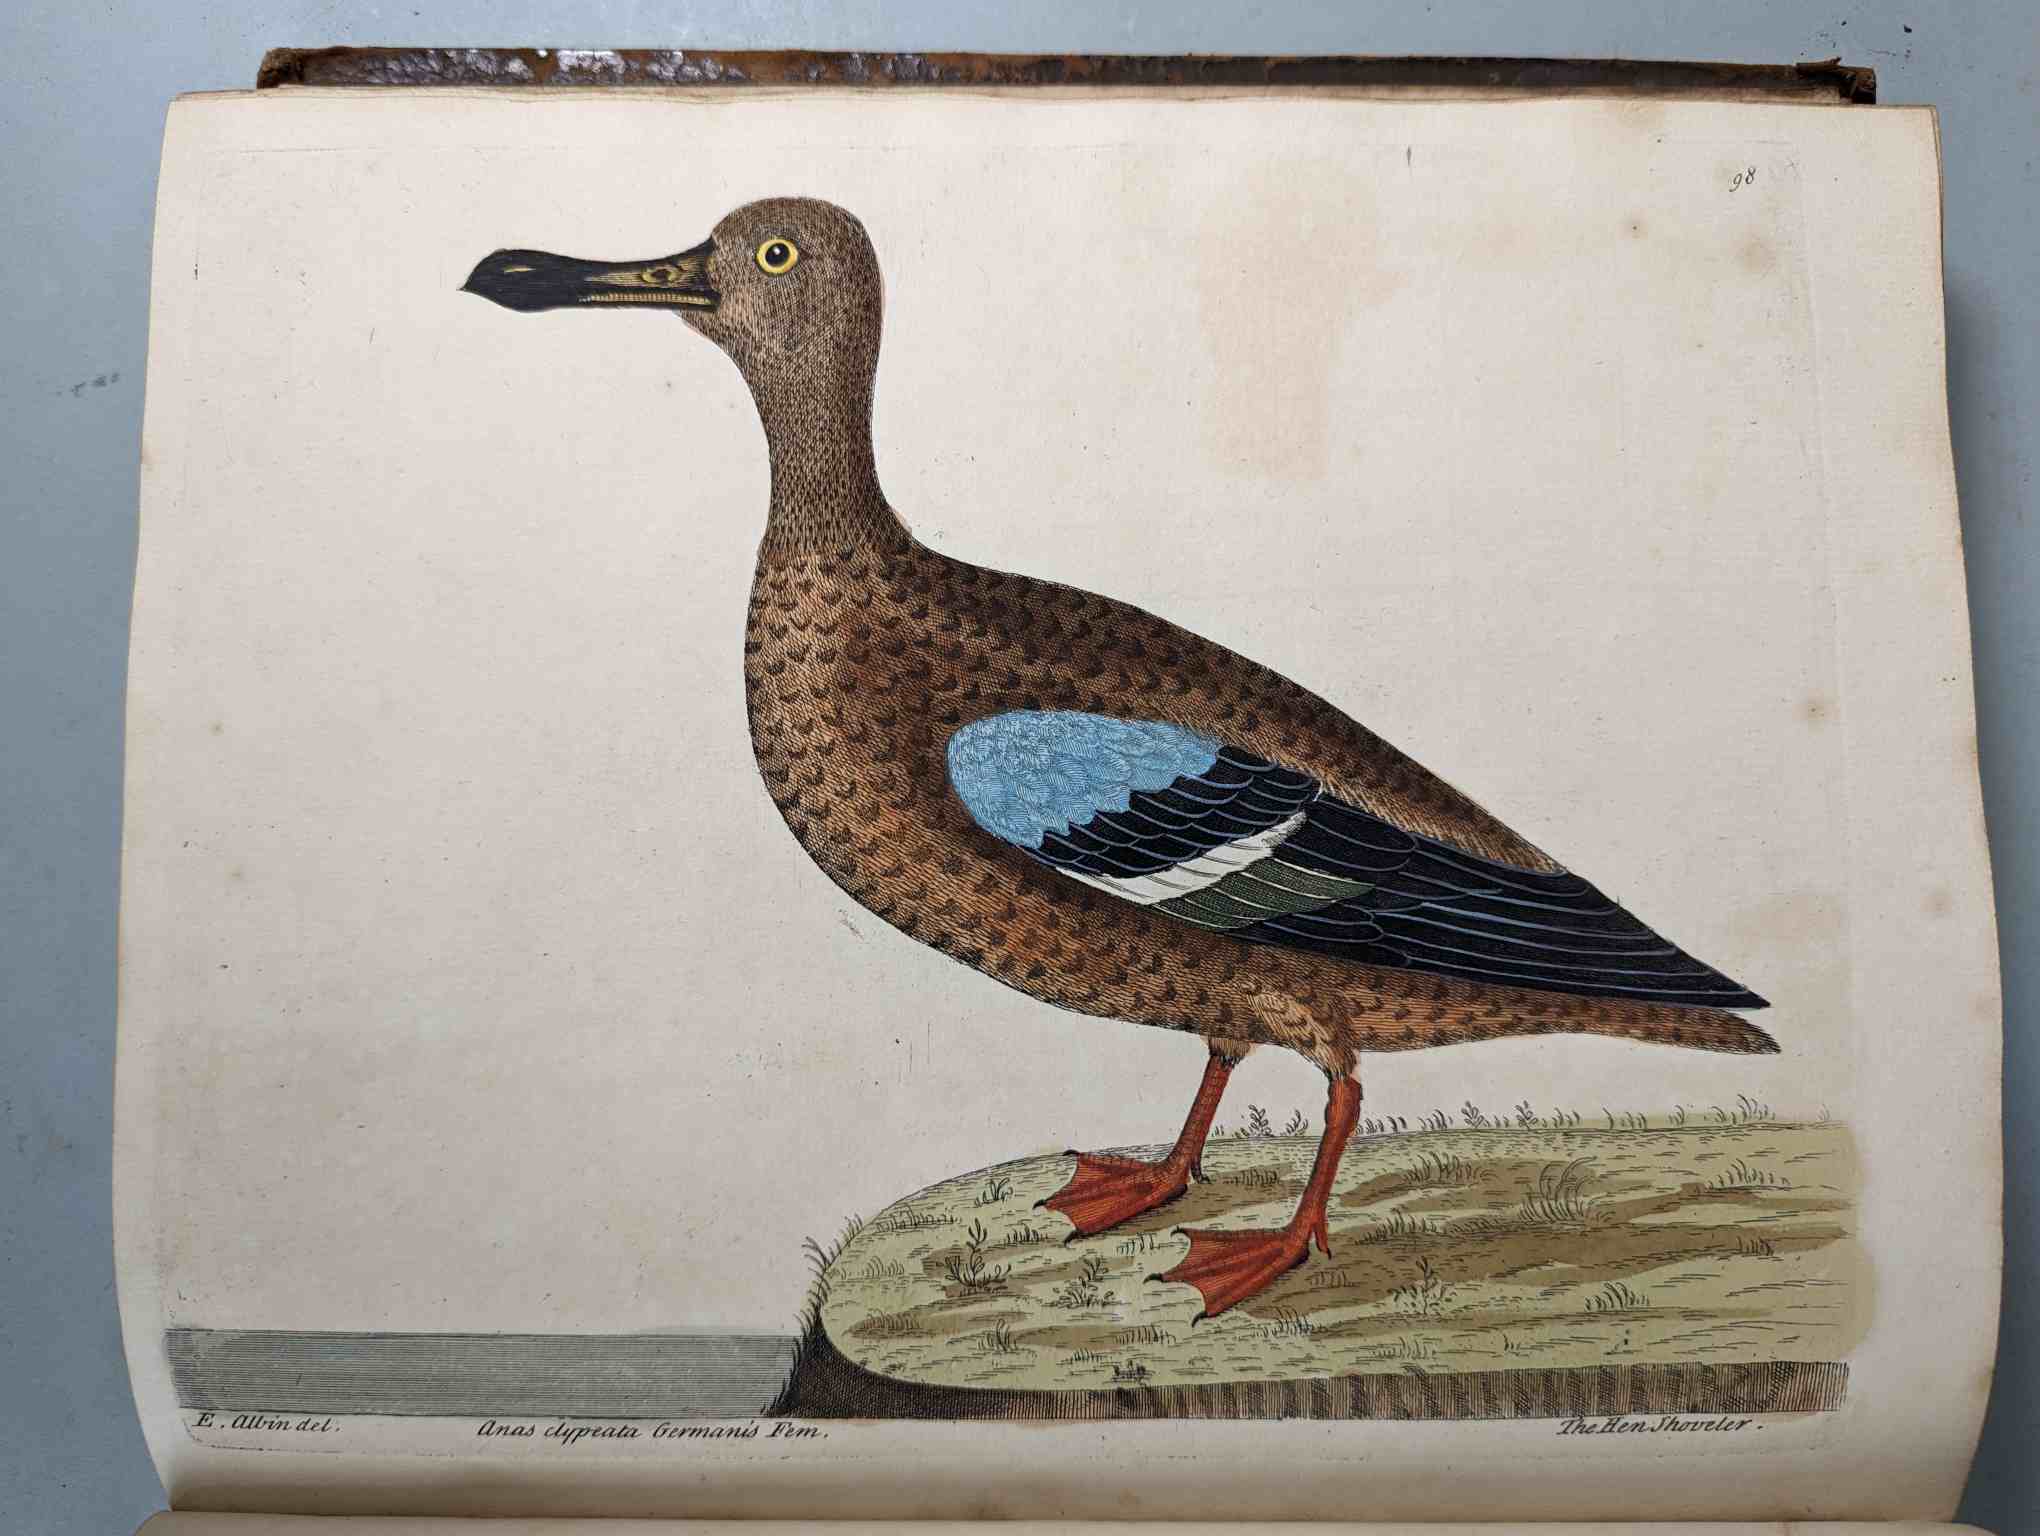 ALBIN, Eleazar. A Natural History of Birds, to which are added, Notes and Observations by W. - Image 100 of 208